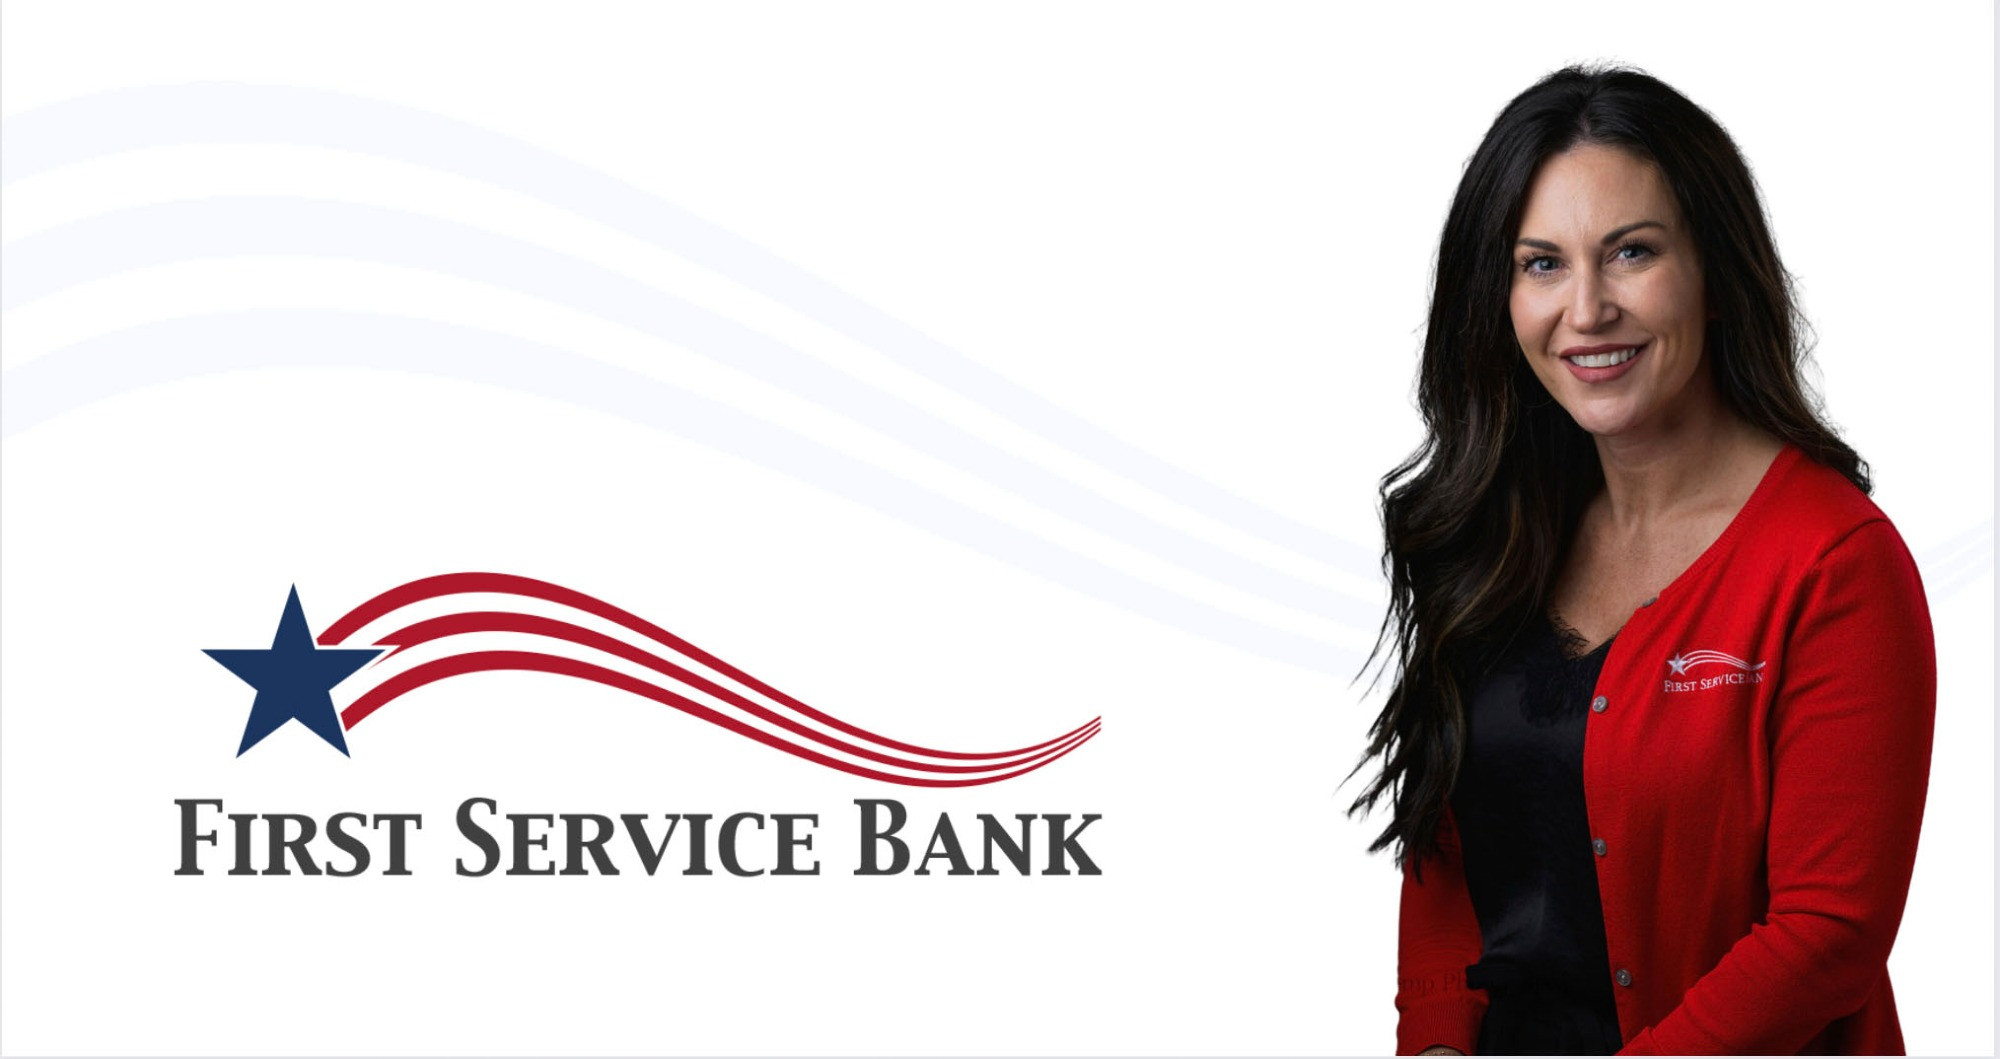 First Service Bank Welcomes Destiny Lankford as Business Development Officer